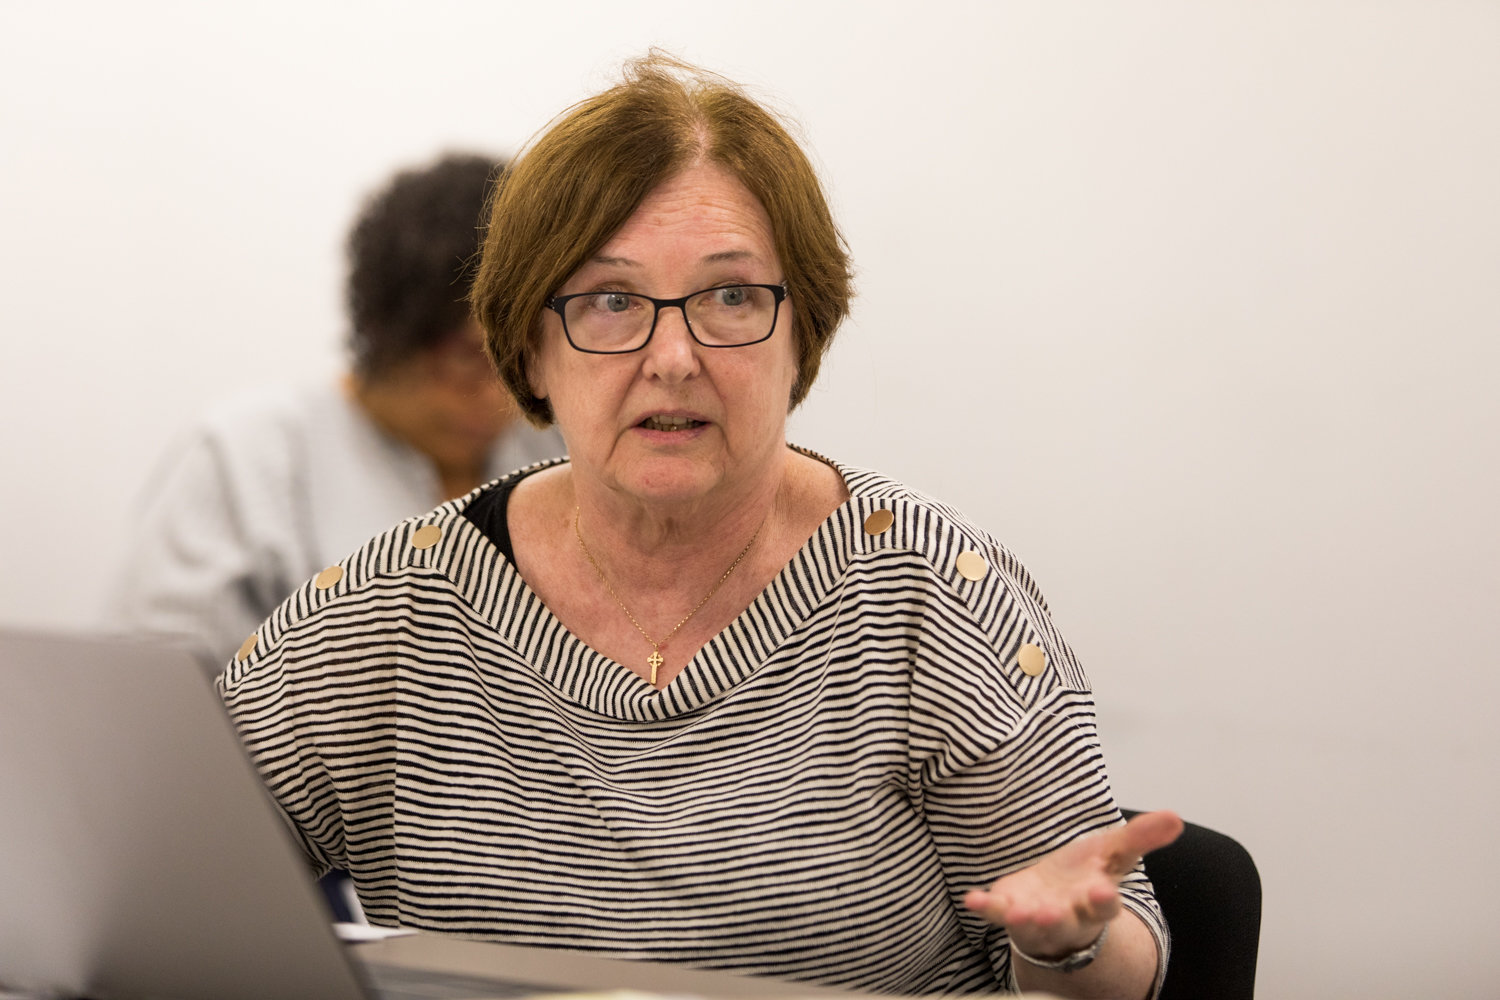 Former Community Board 8 chair Rosemary Ginty fears Stagg Group might bring in another temporary homeless transitional facility, preferring instead to have a 'permanent' one.